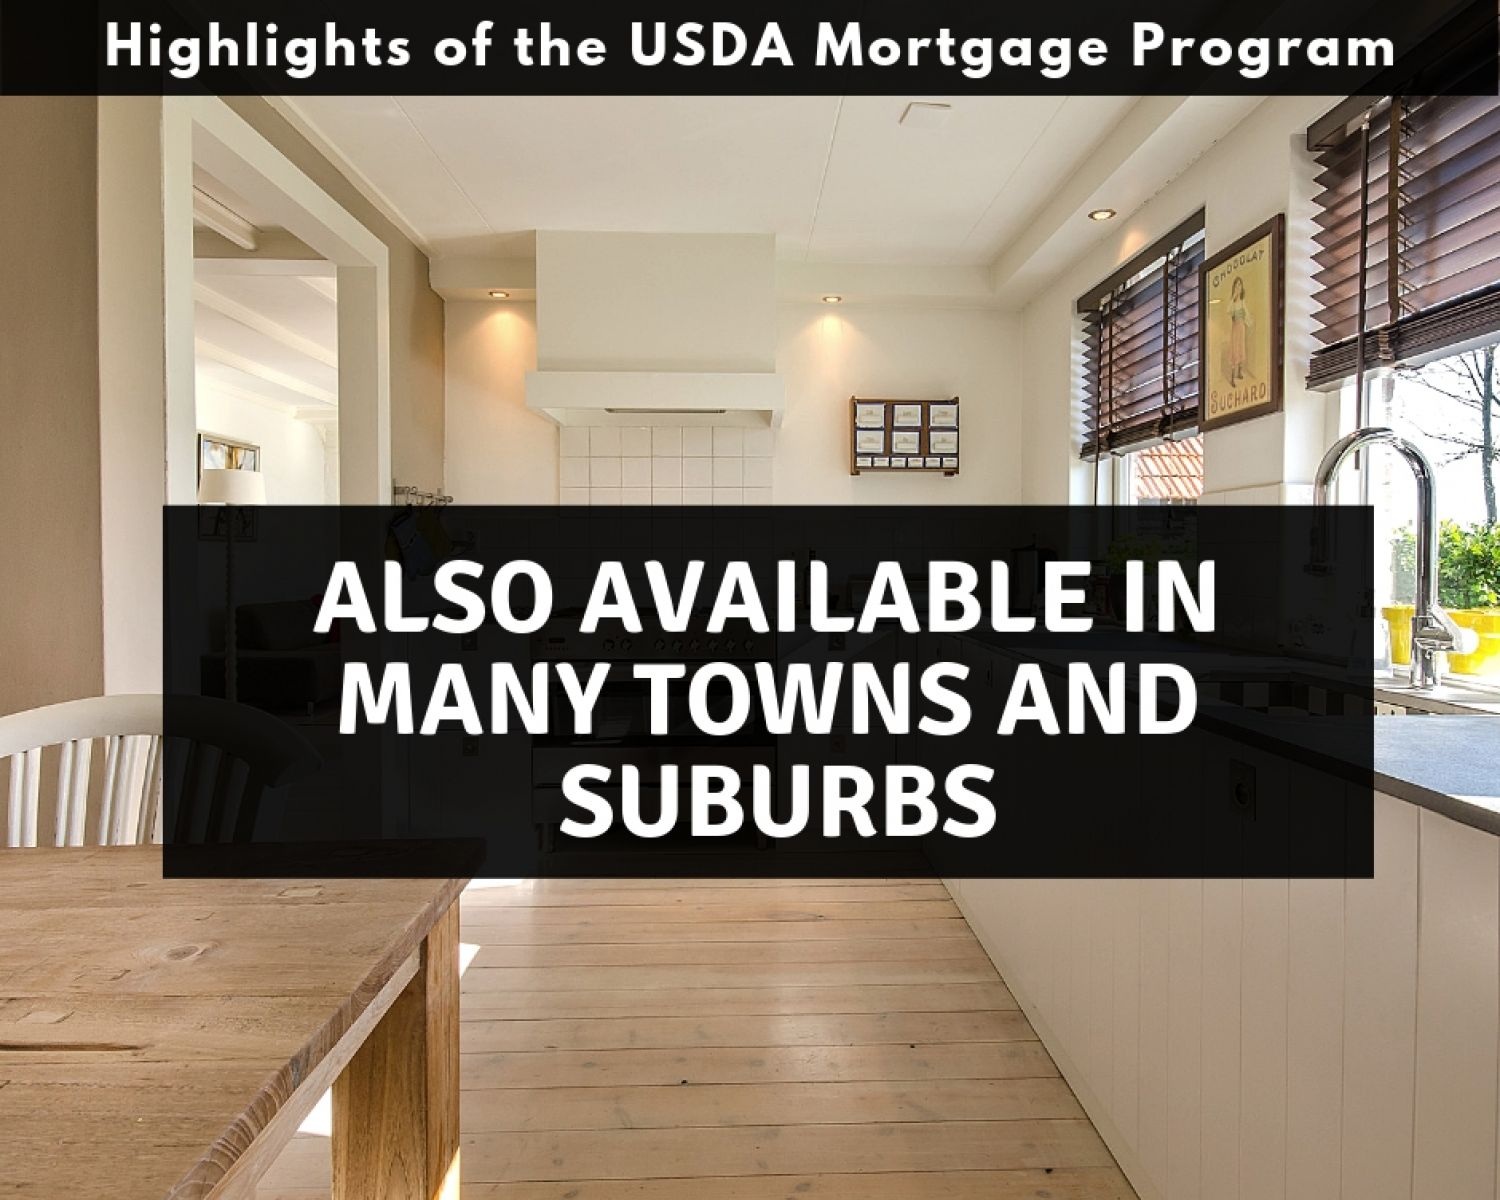 Pennsylvania USDA Mortgages available in towns and suburbs